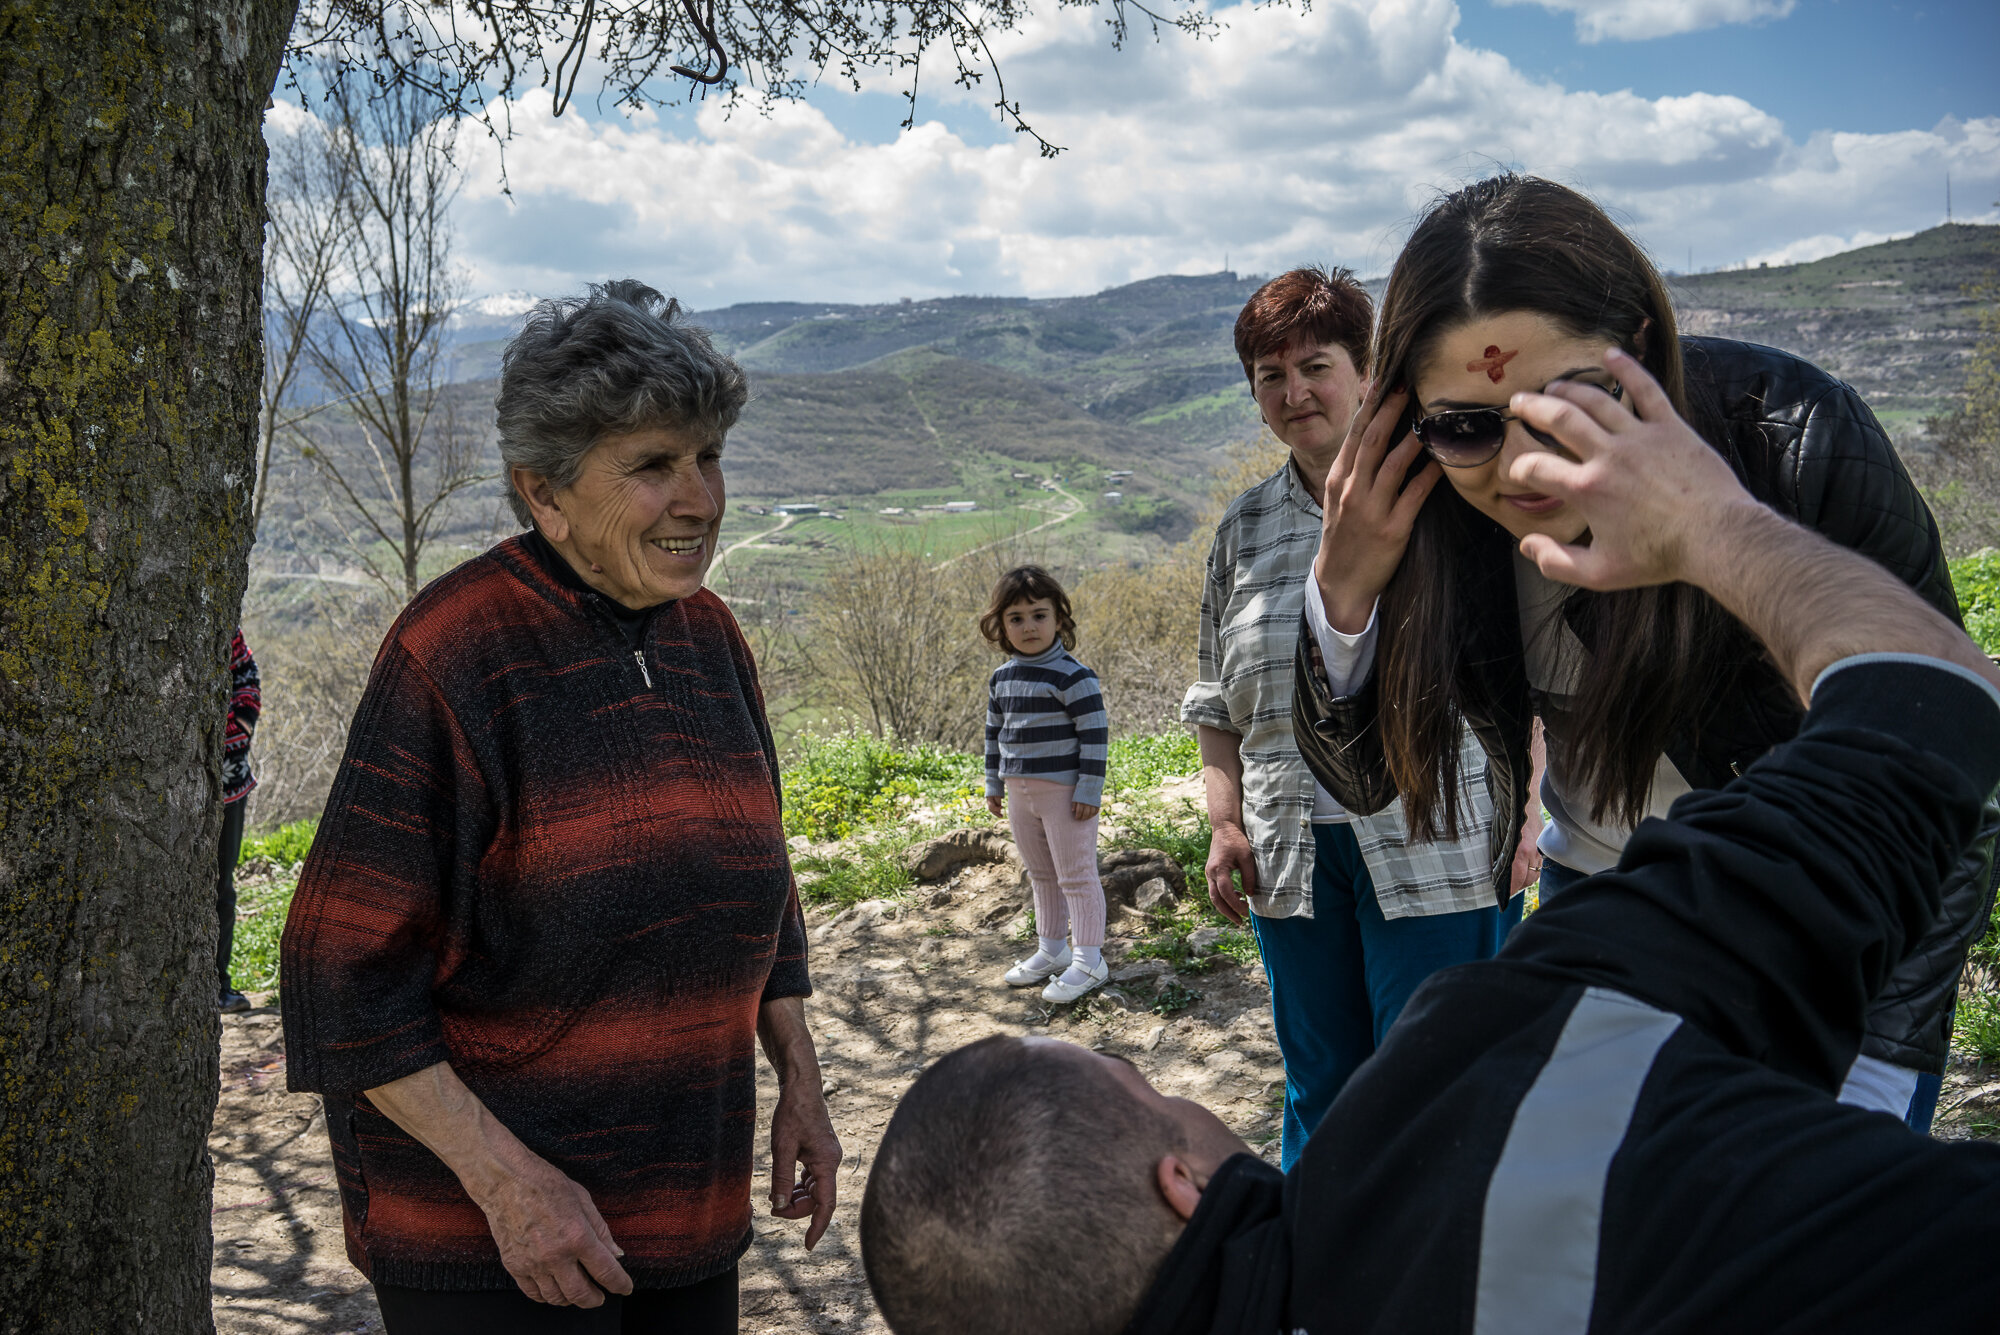  Members of the Abrahamyan family sacrifice a chicken, the blood of which is used to paint a cross on the forehead, to bring good fortune at the sacred site of Surb Saribek. Karashen, Nagorno-Karabakh. 2015. 